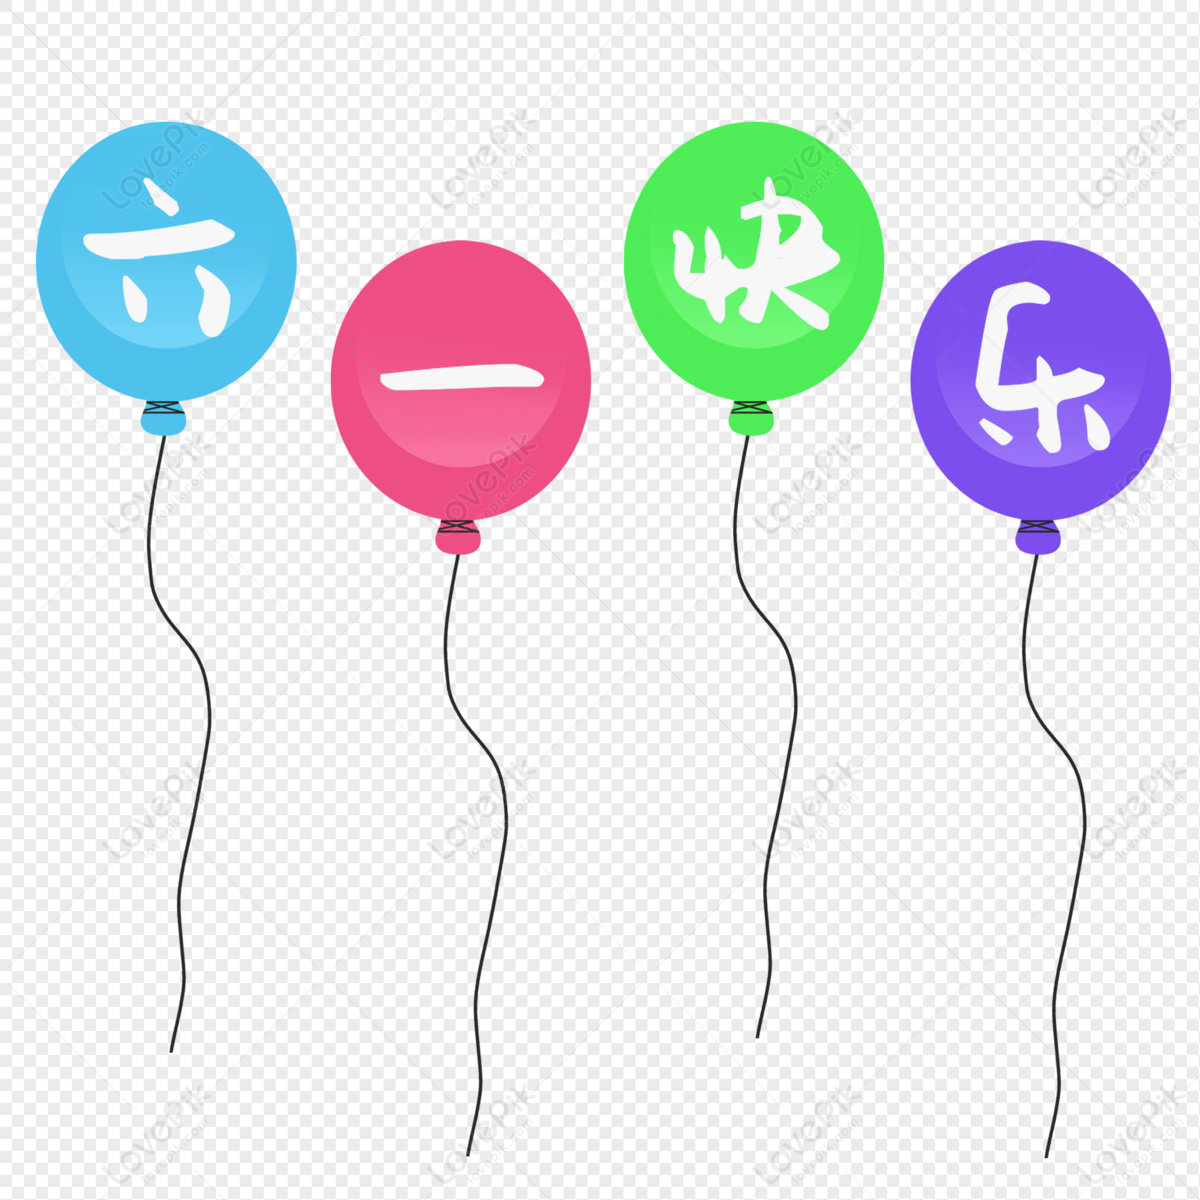 Balloon String PNG Transparent Images Free Download, Vector Files